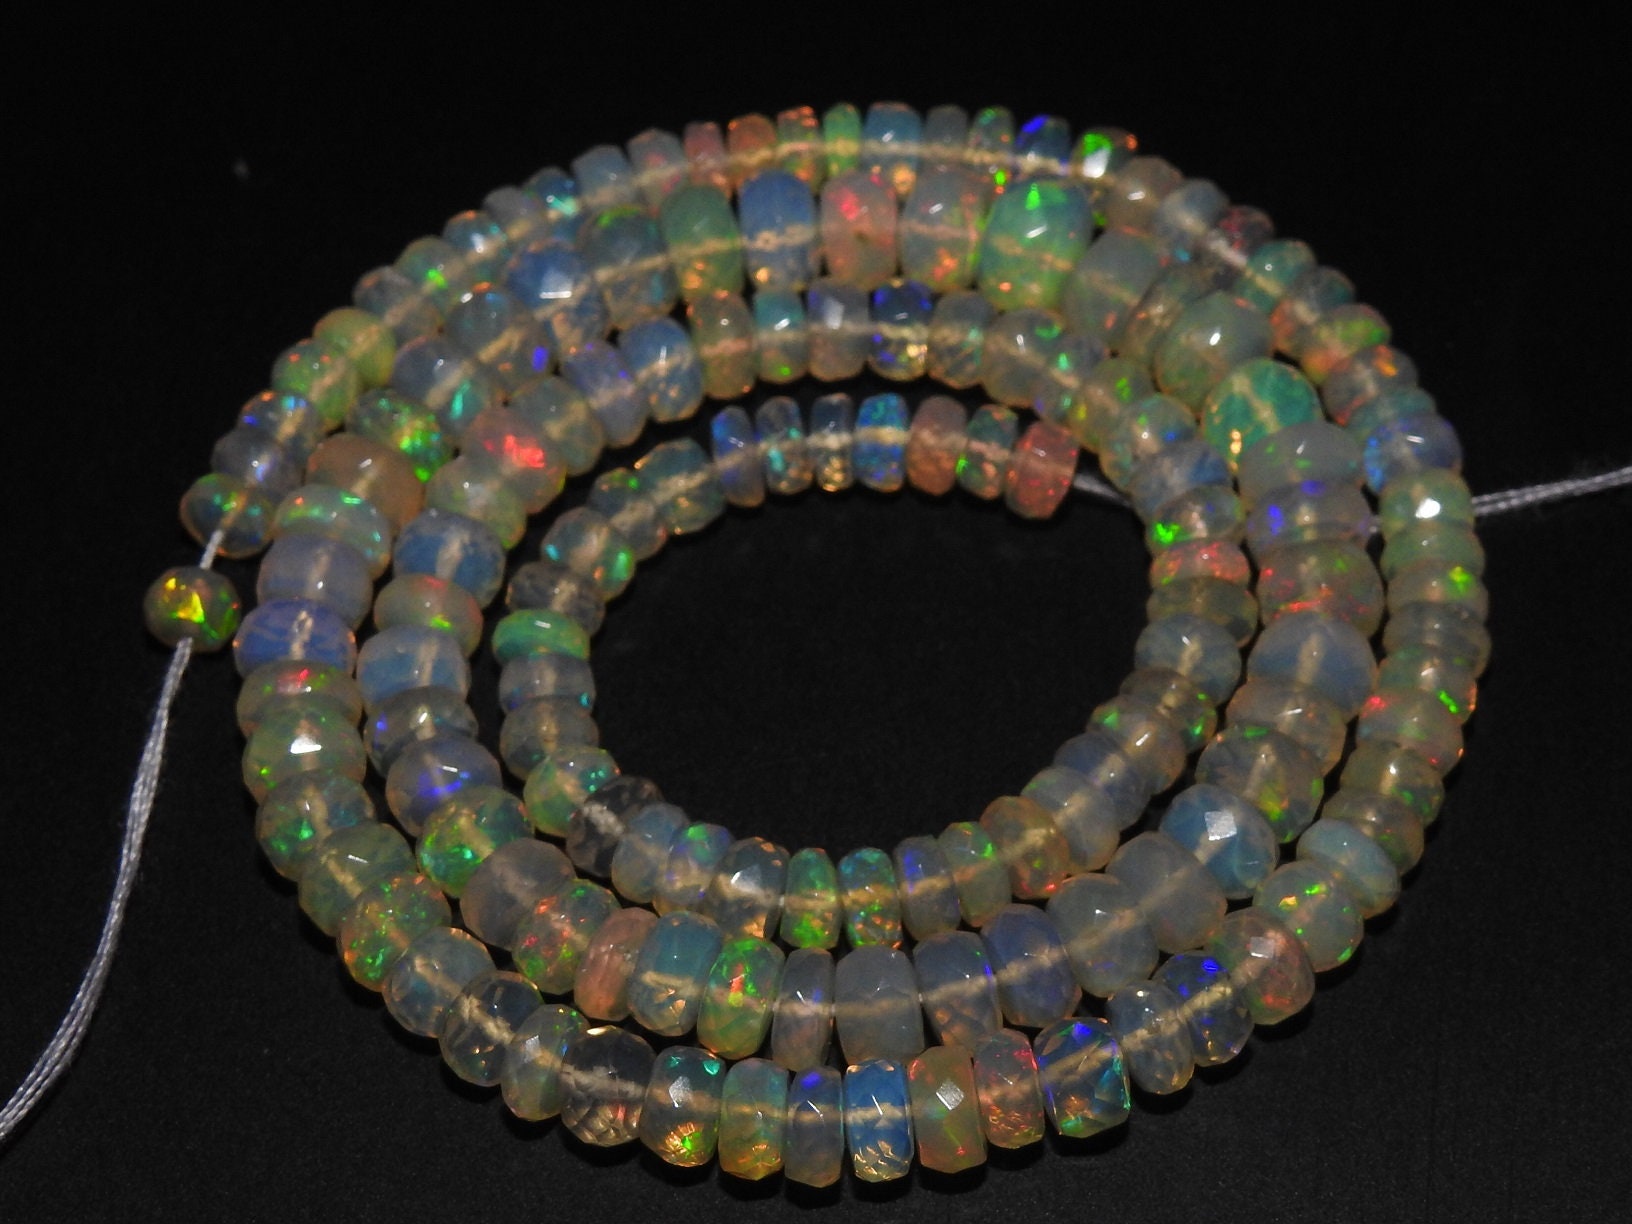 Ethiopian Opal Faceted Roundel Beads,Loose Stone,Multi Fire,Handmade,For Making Jewelry,4To6MM Approx,Wholesaler,Supplies,100%NaturalPME-EO2 | Save 33% - Rajasthan Living 13